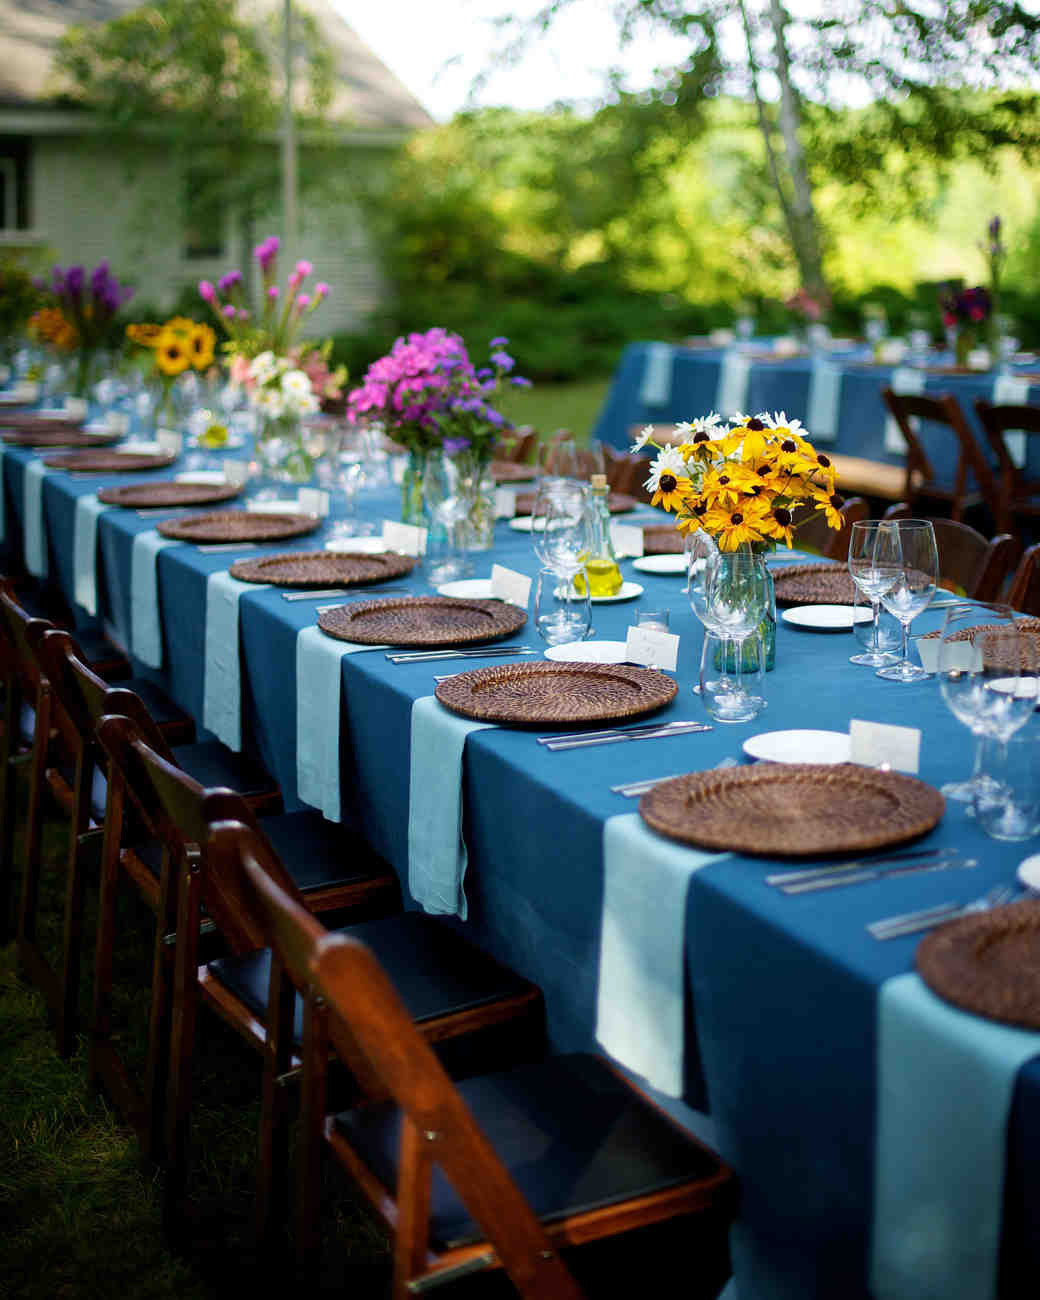 Outdoor Engagement Party Ideas
 How to Throw the Perfect Backyard Engagement Party